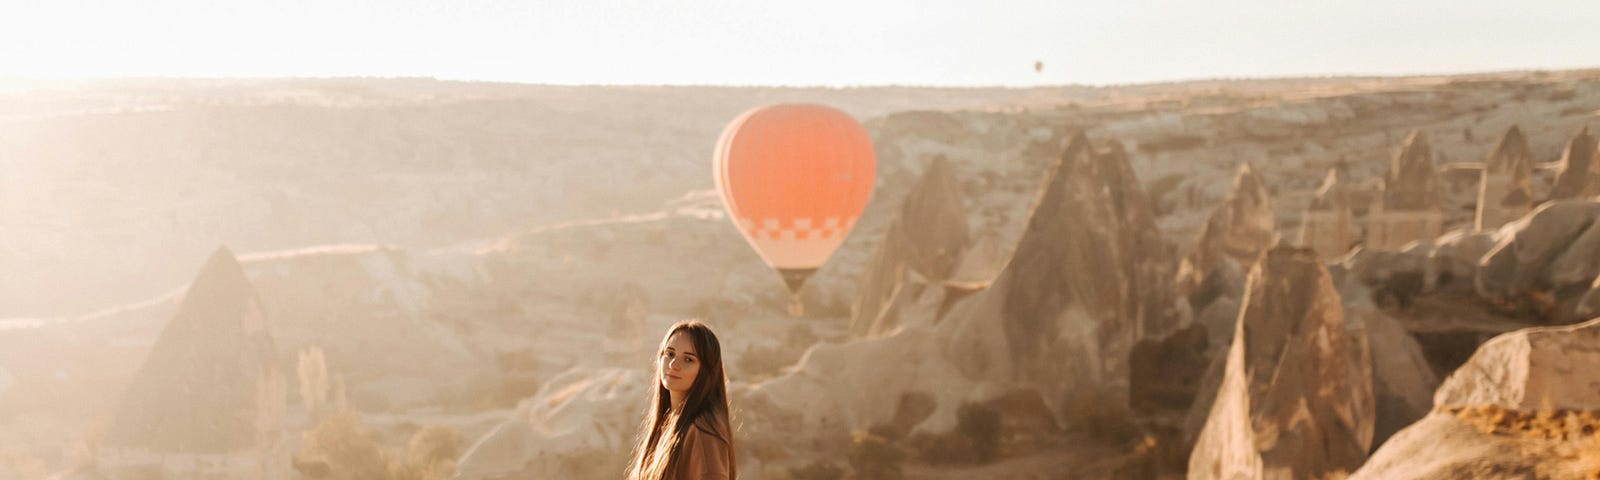 woman wearing brown coat standing outside, on a cliff. orange hot hair balloon in the sky